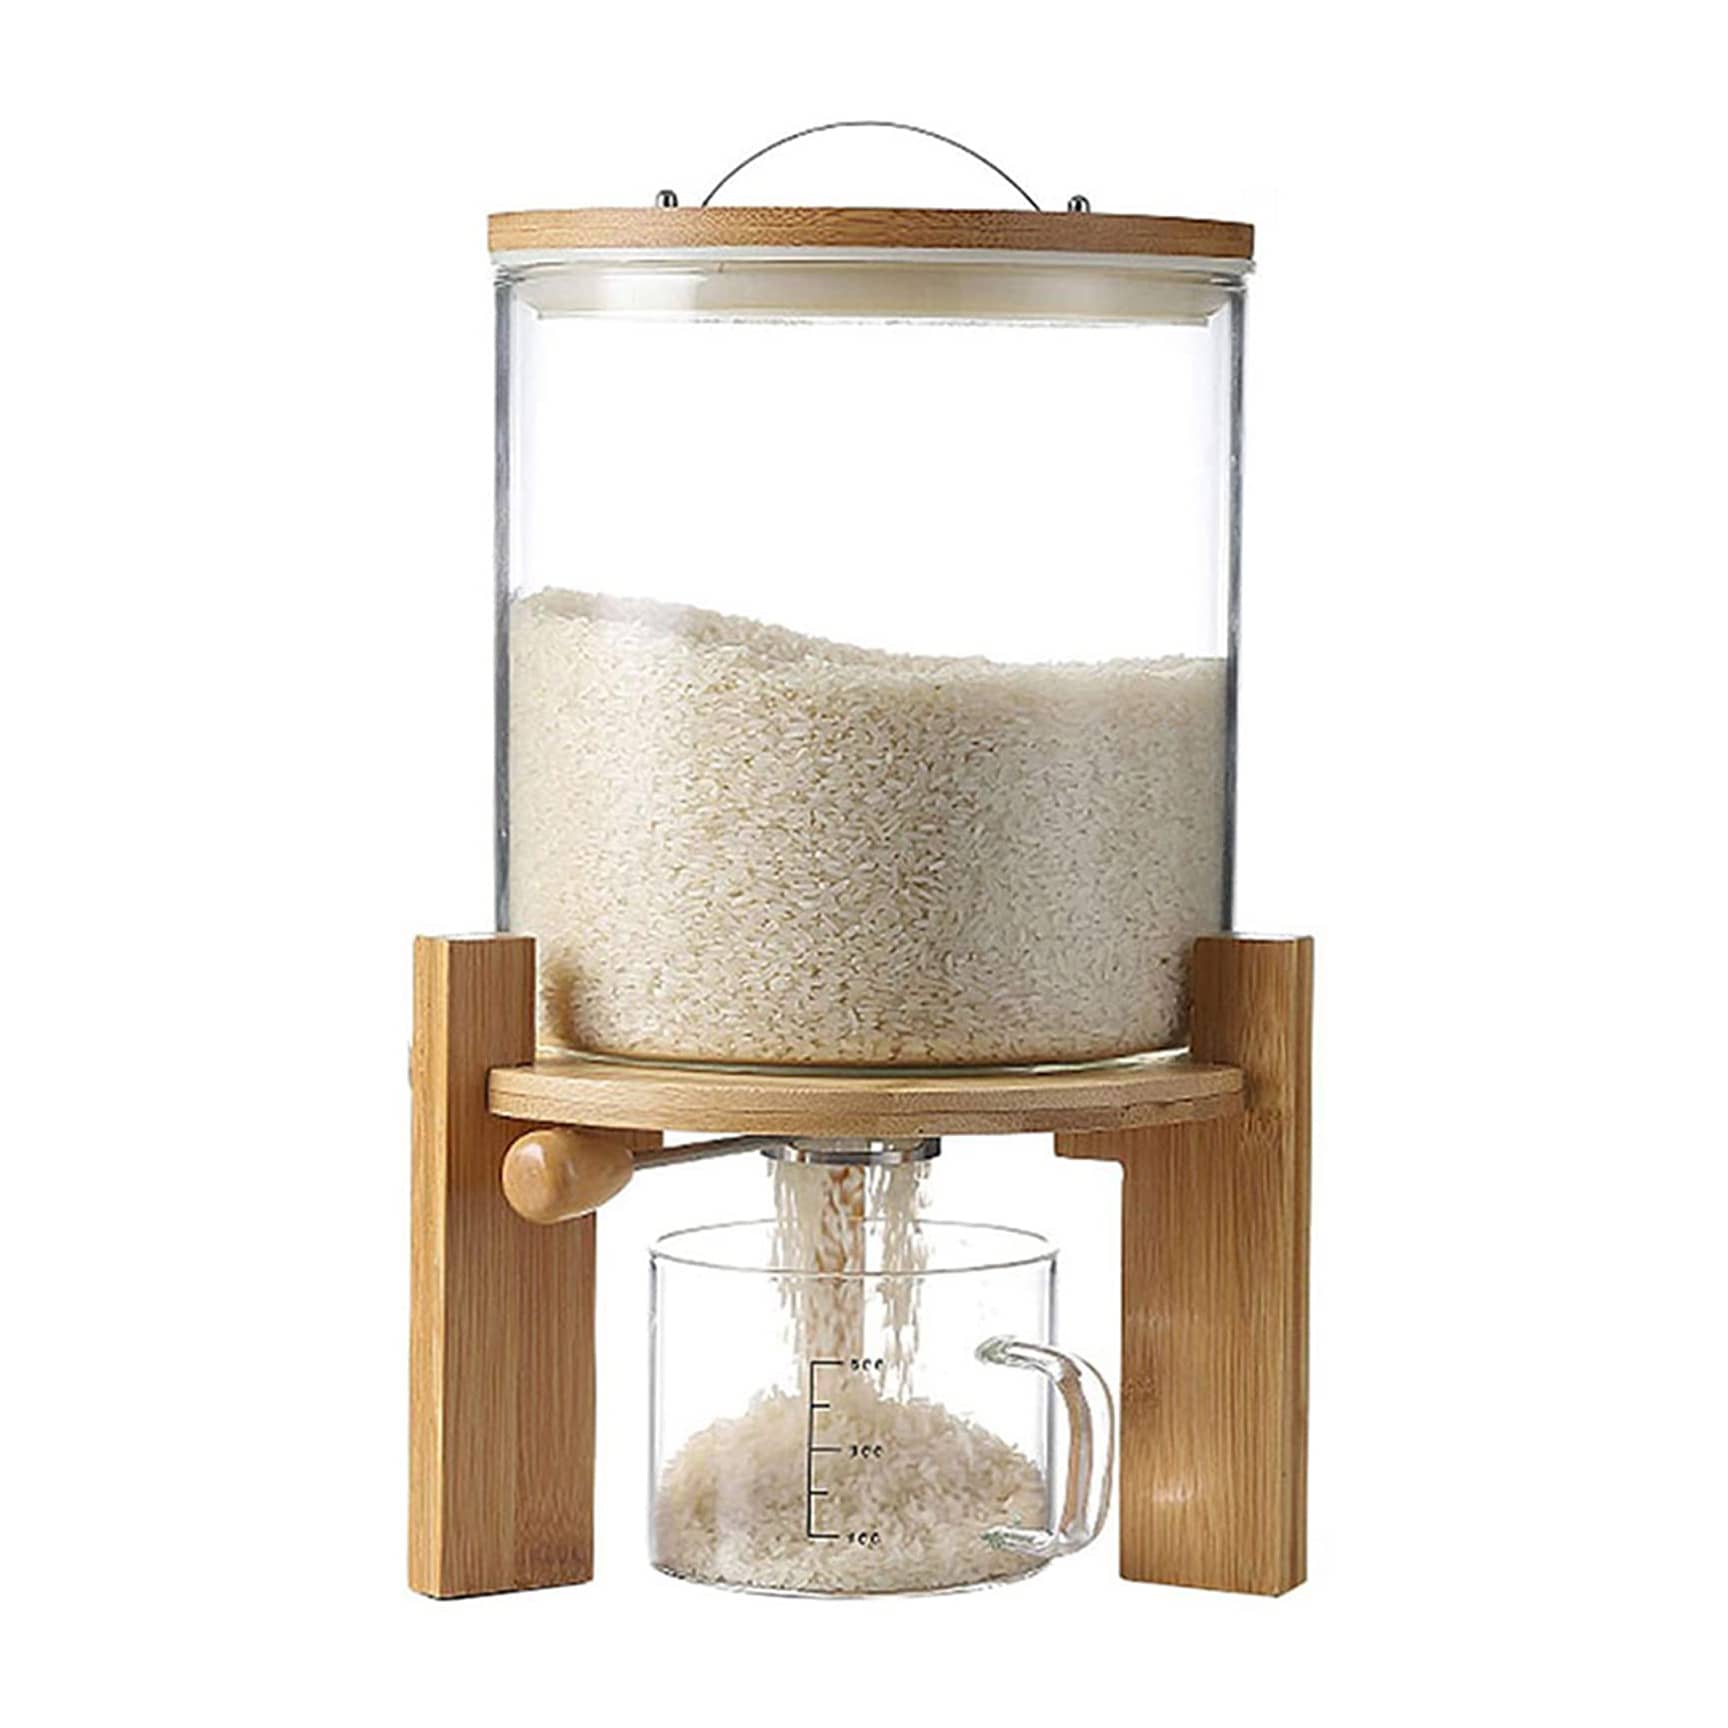 10 Liter Rice Storage Container with Wheels and Measuring Cup